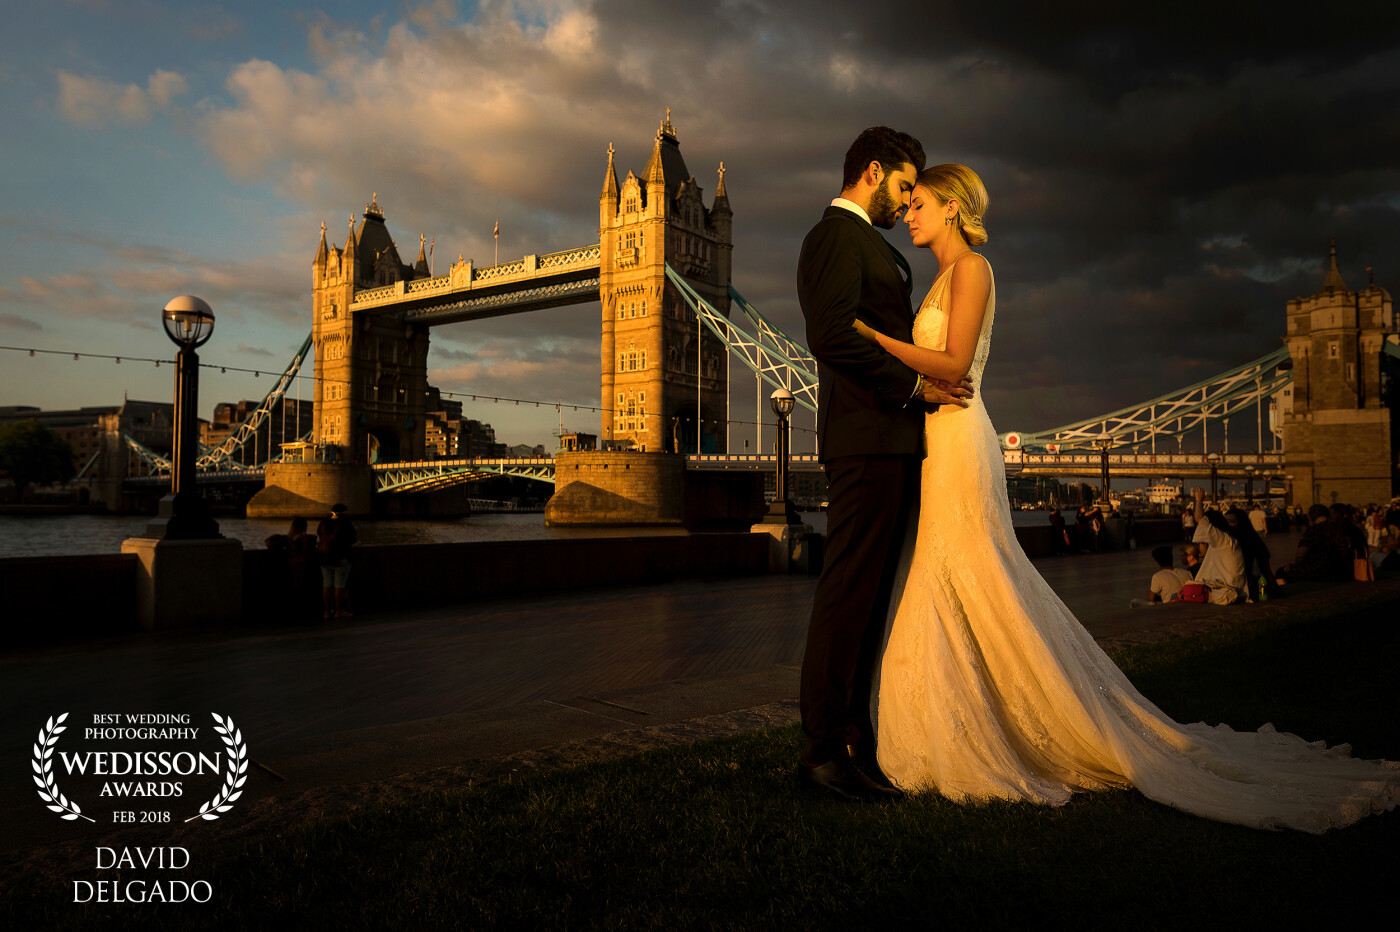 Under the Sun - Mr. & Mrs. Sanchez demonstrating his love in this beautiful emblem of the city of London, sunset, and the famous English clouds that always chase you... What more could you want?